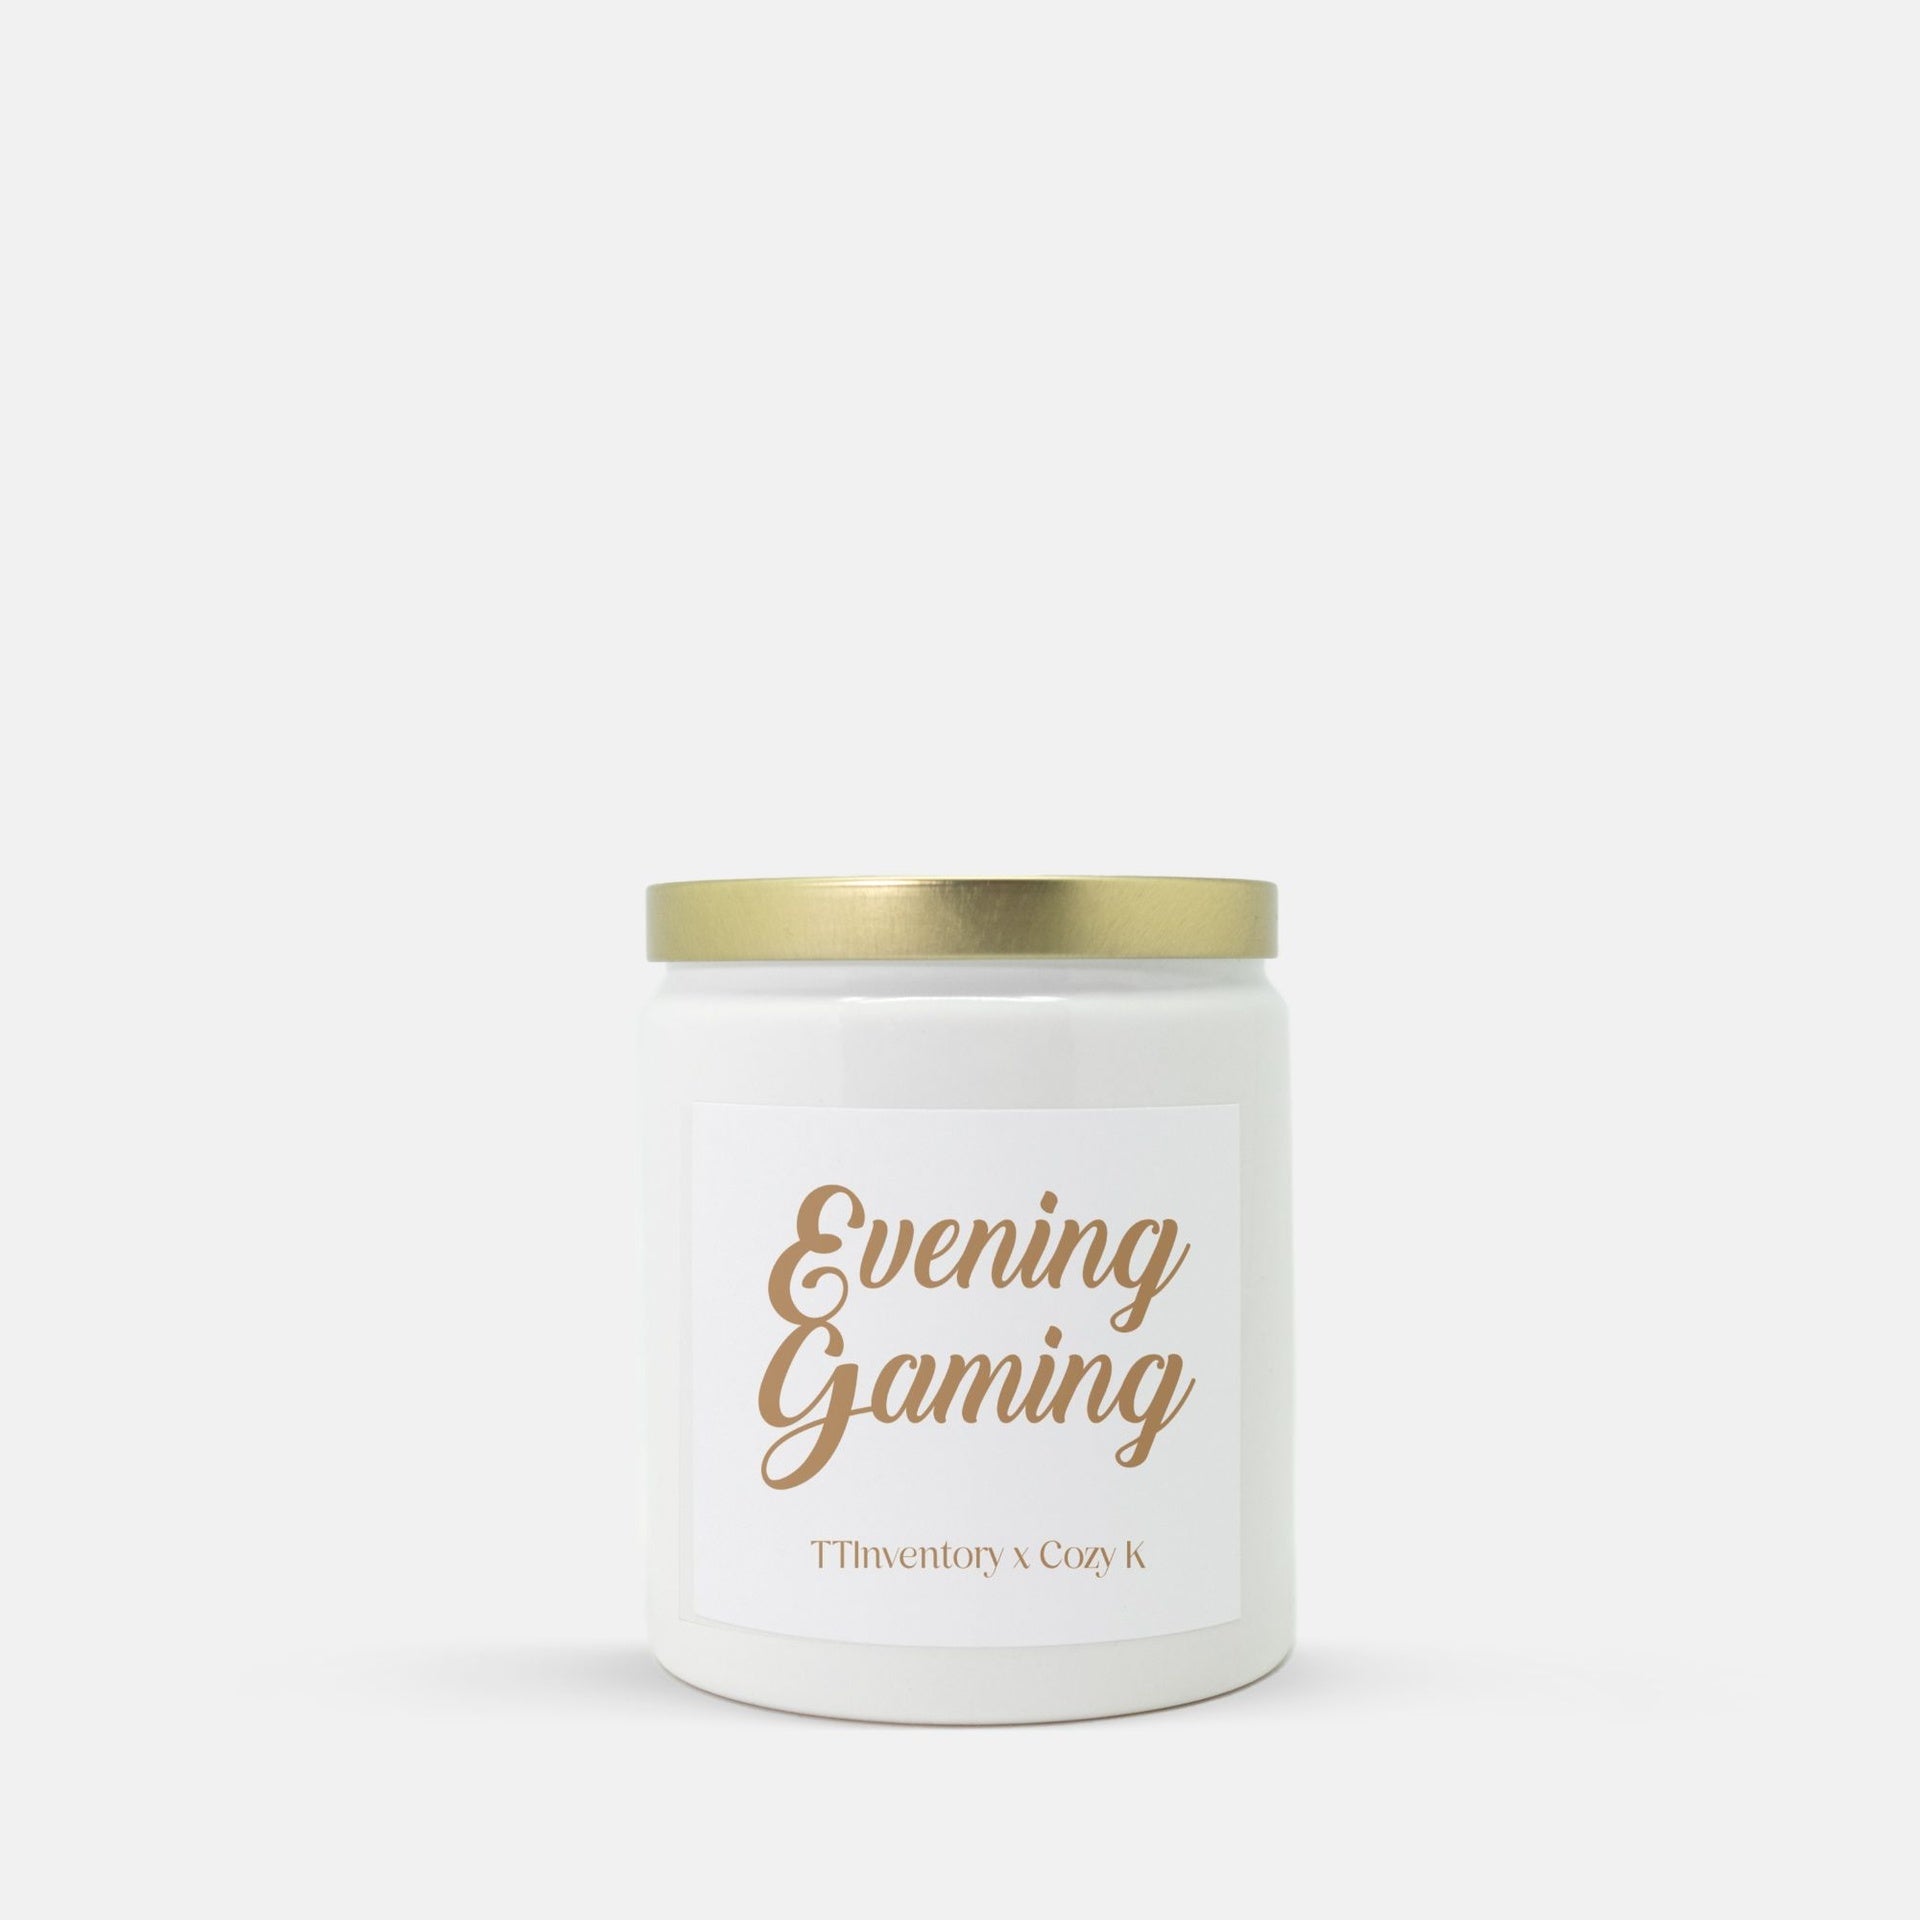 Evening Gaming | 8oz Ceramic Candle | Cozy Gamer Candles Threads & Thistles Inventory 